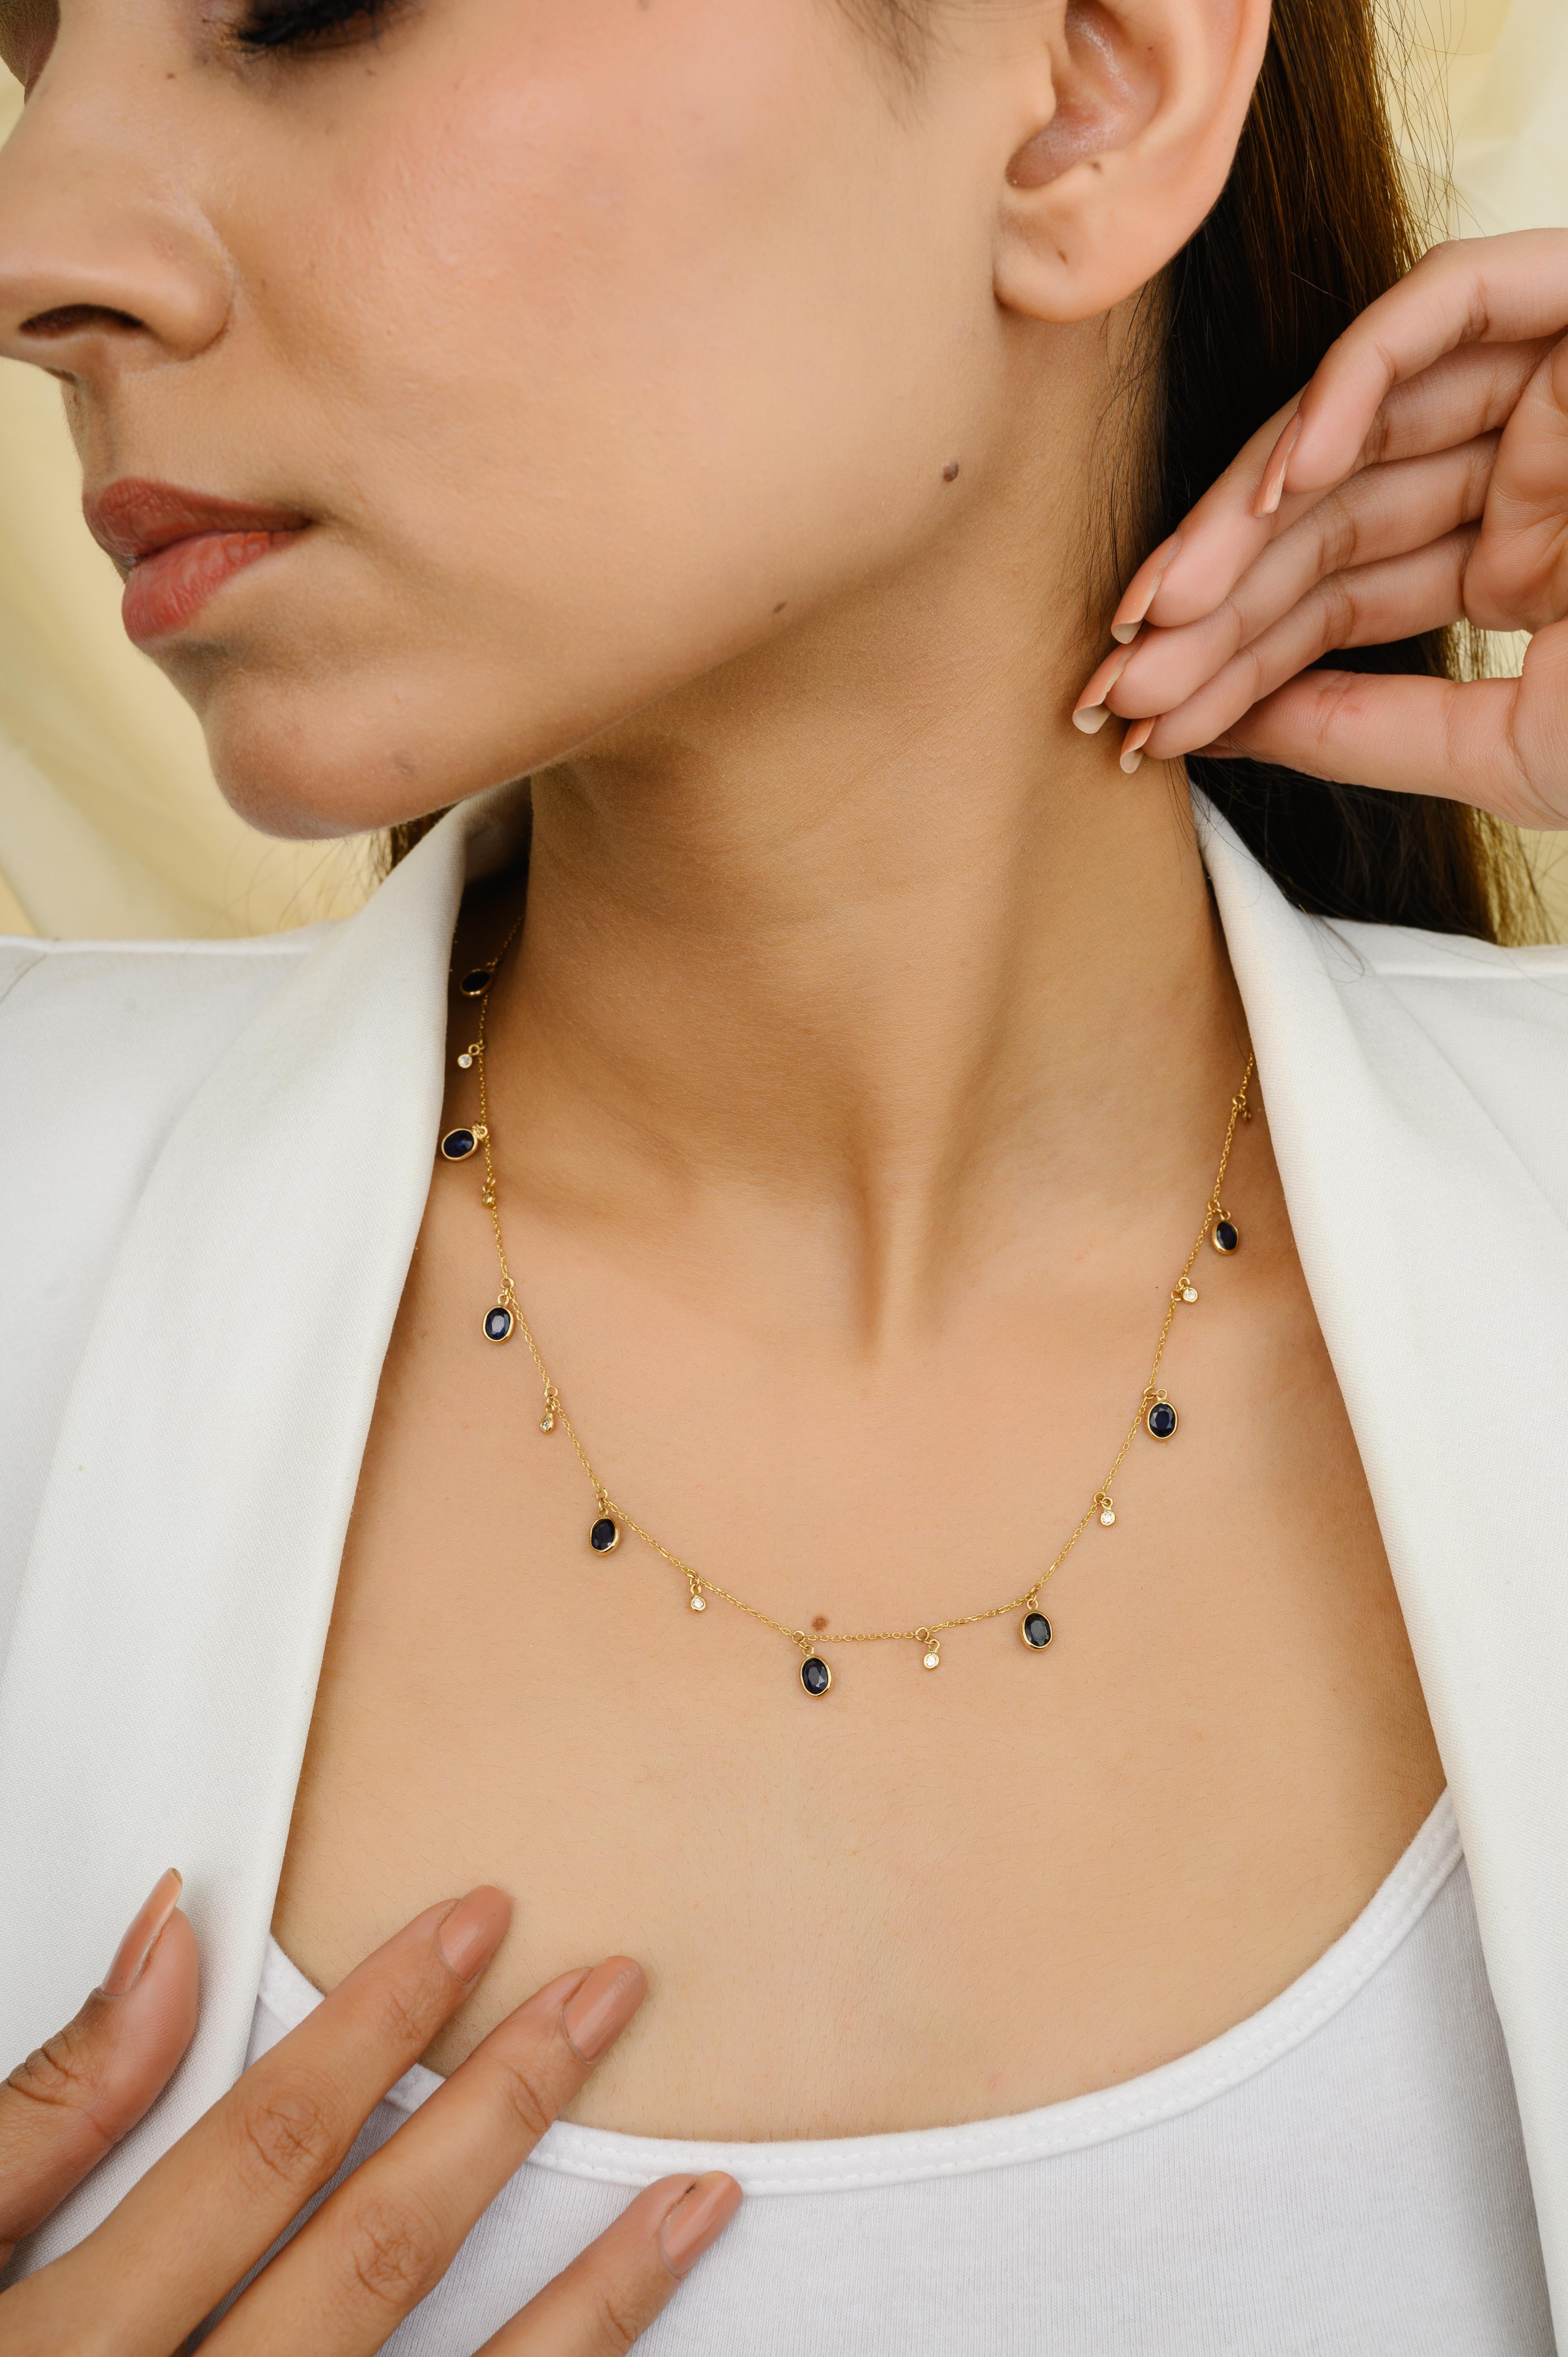 Blue Sapphire and Diamond Charm Layering Necklace in 18K Gold with oval cut blue sapphire and diamonds. This stunning piece of jewelry instantly elevates a casual look or dressy outfit. 
Sapphire stimulates concentration and reduces stress.
Designed